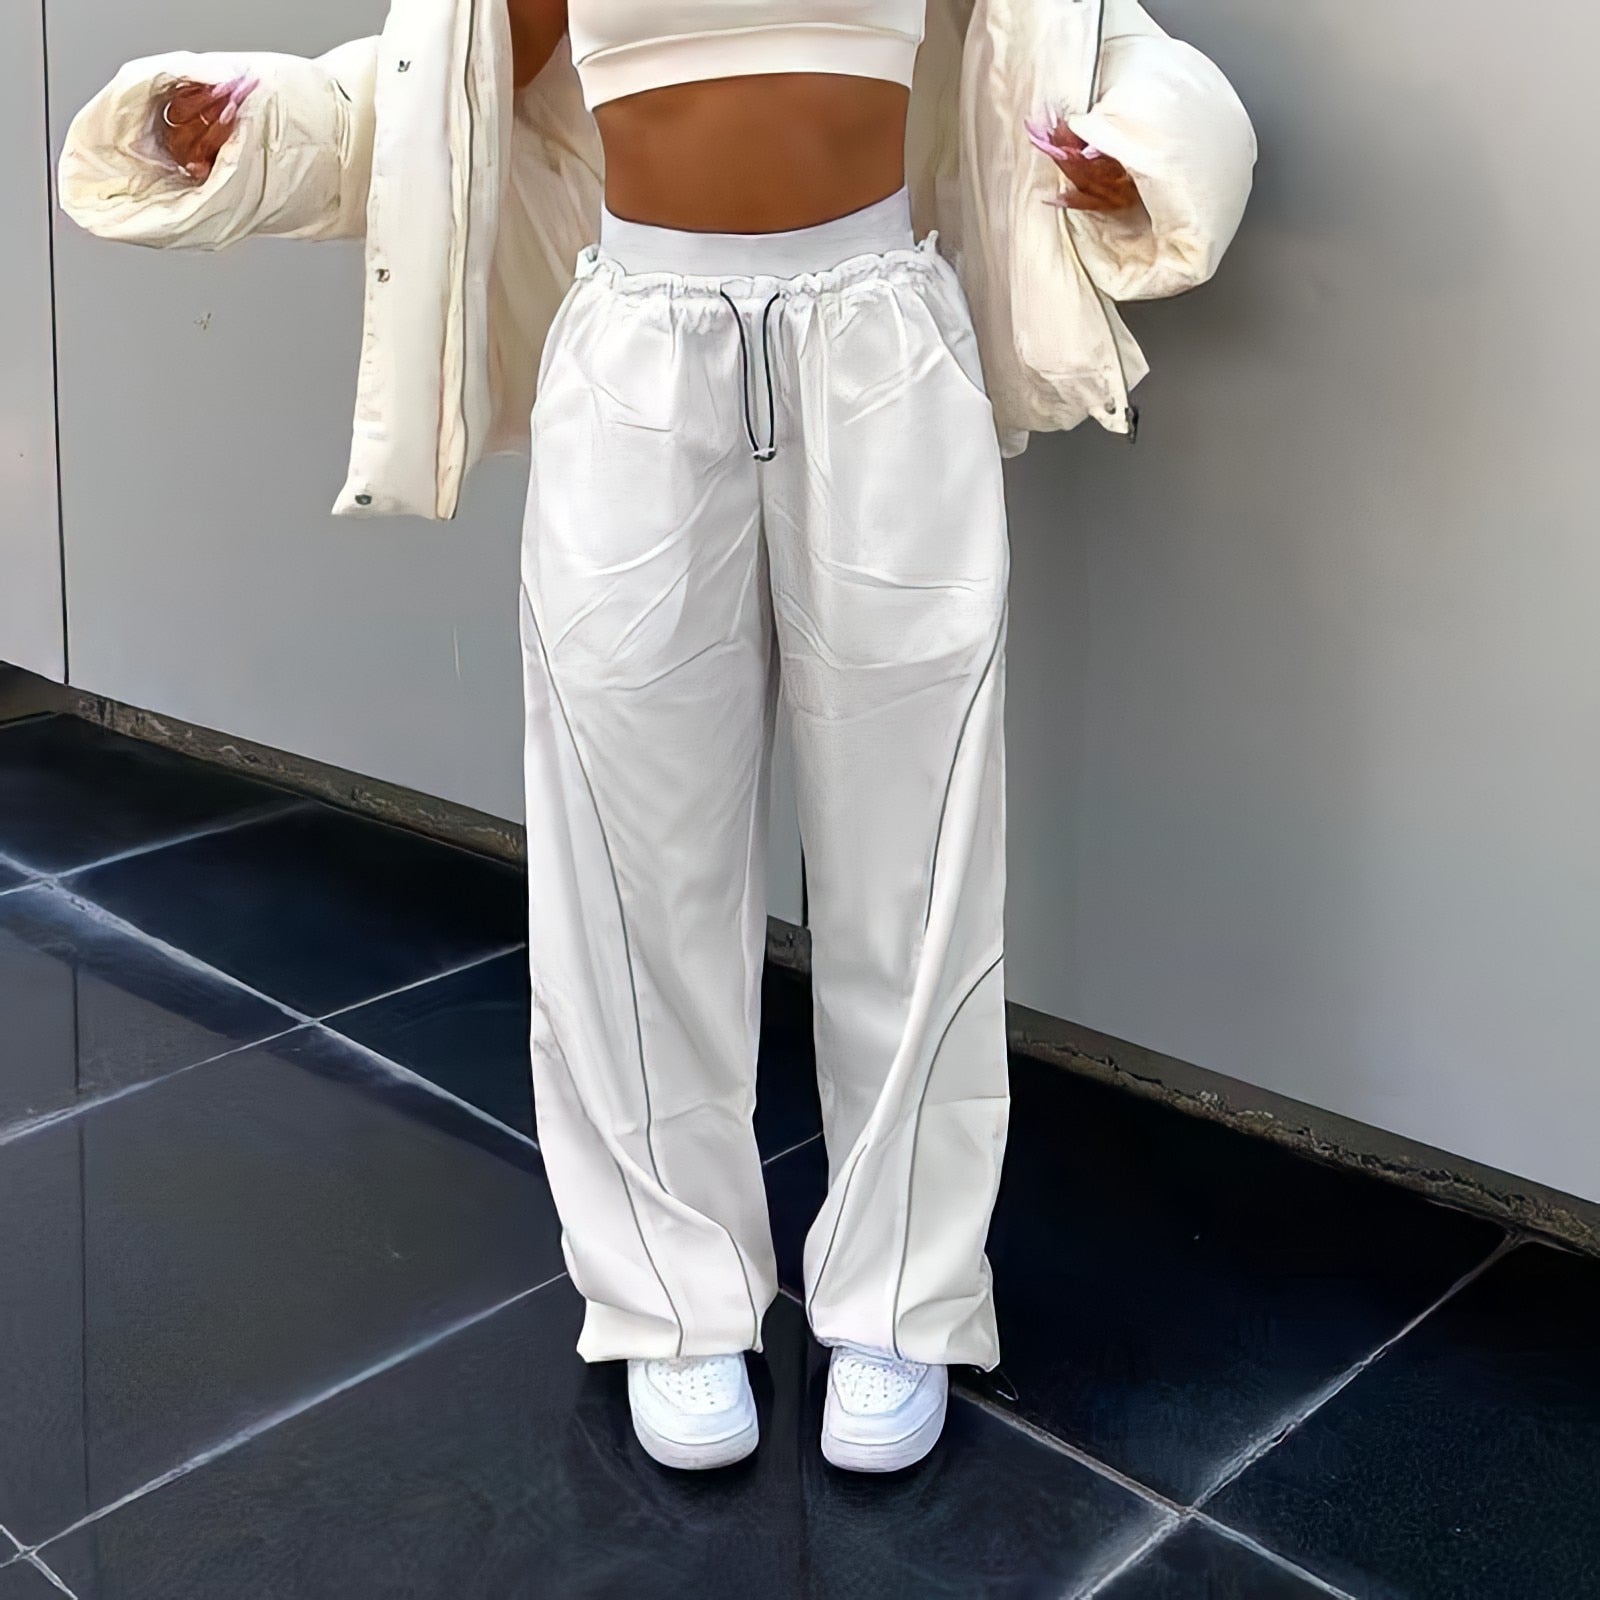 Women's High Waist Oversize Sweatpants for Jogging and Streetwear with Wide Leg Trousers